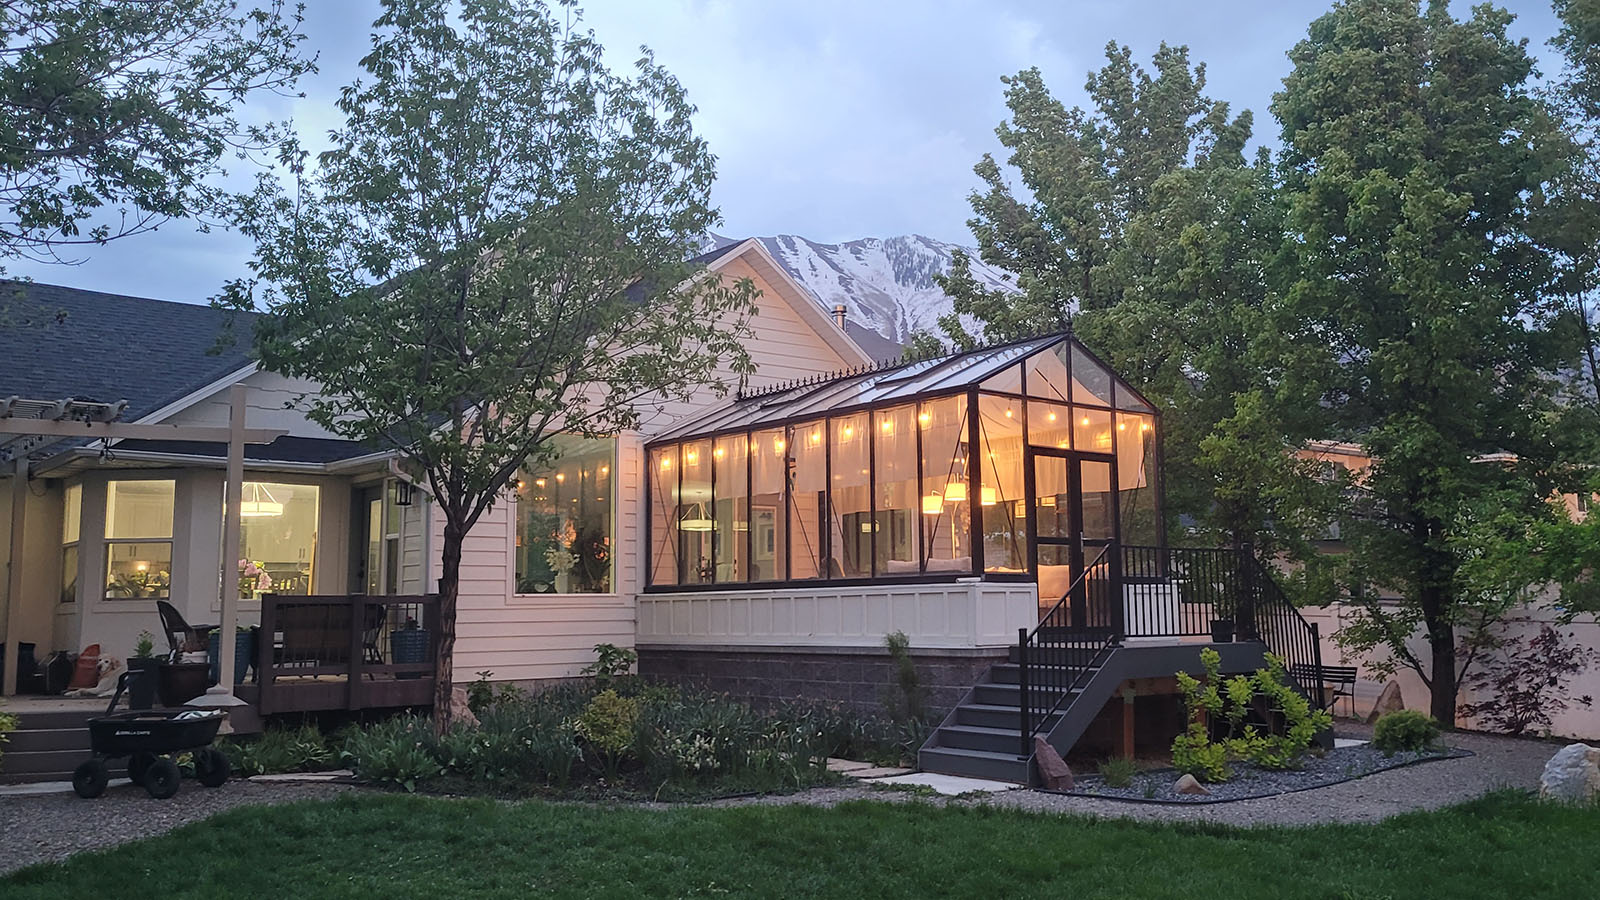 Victorian vi36 Used as Extension of Home in Utah